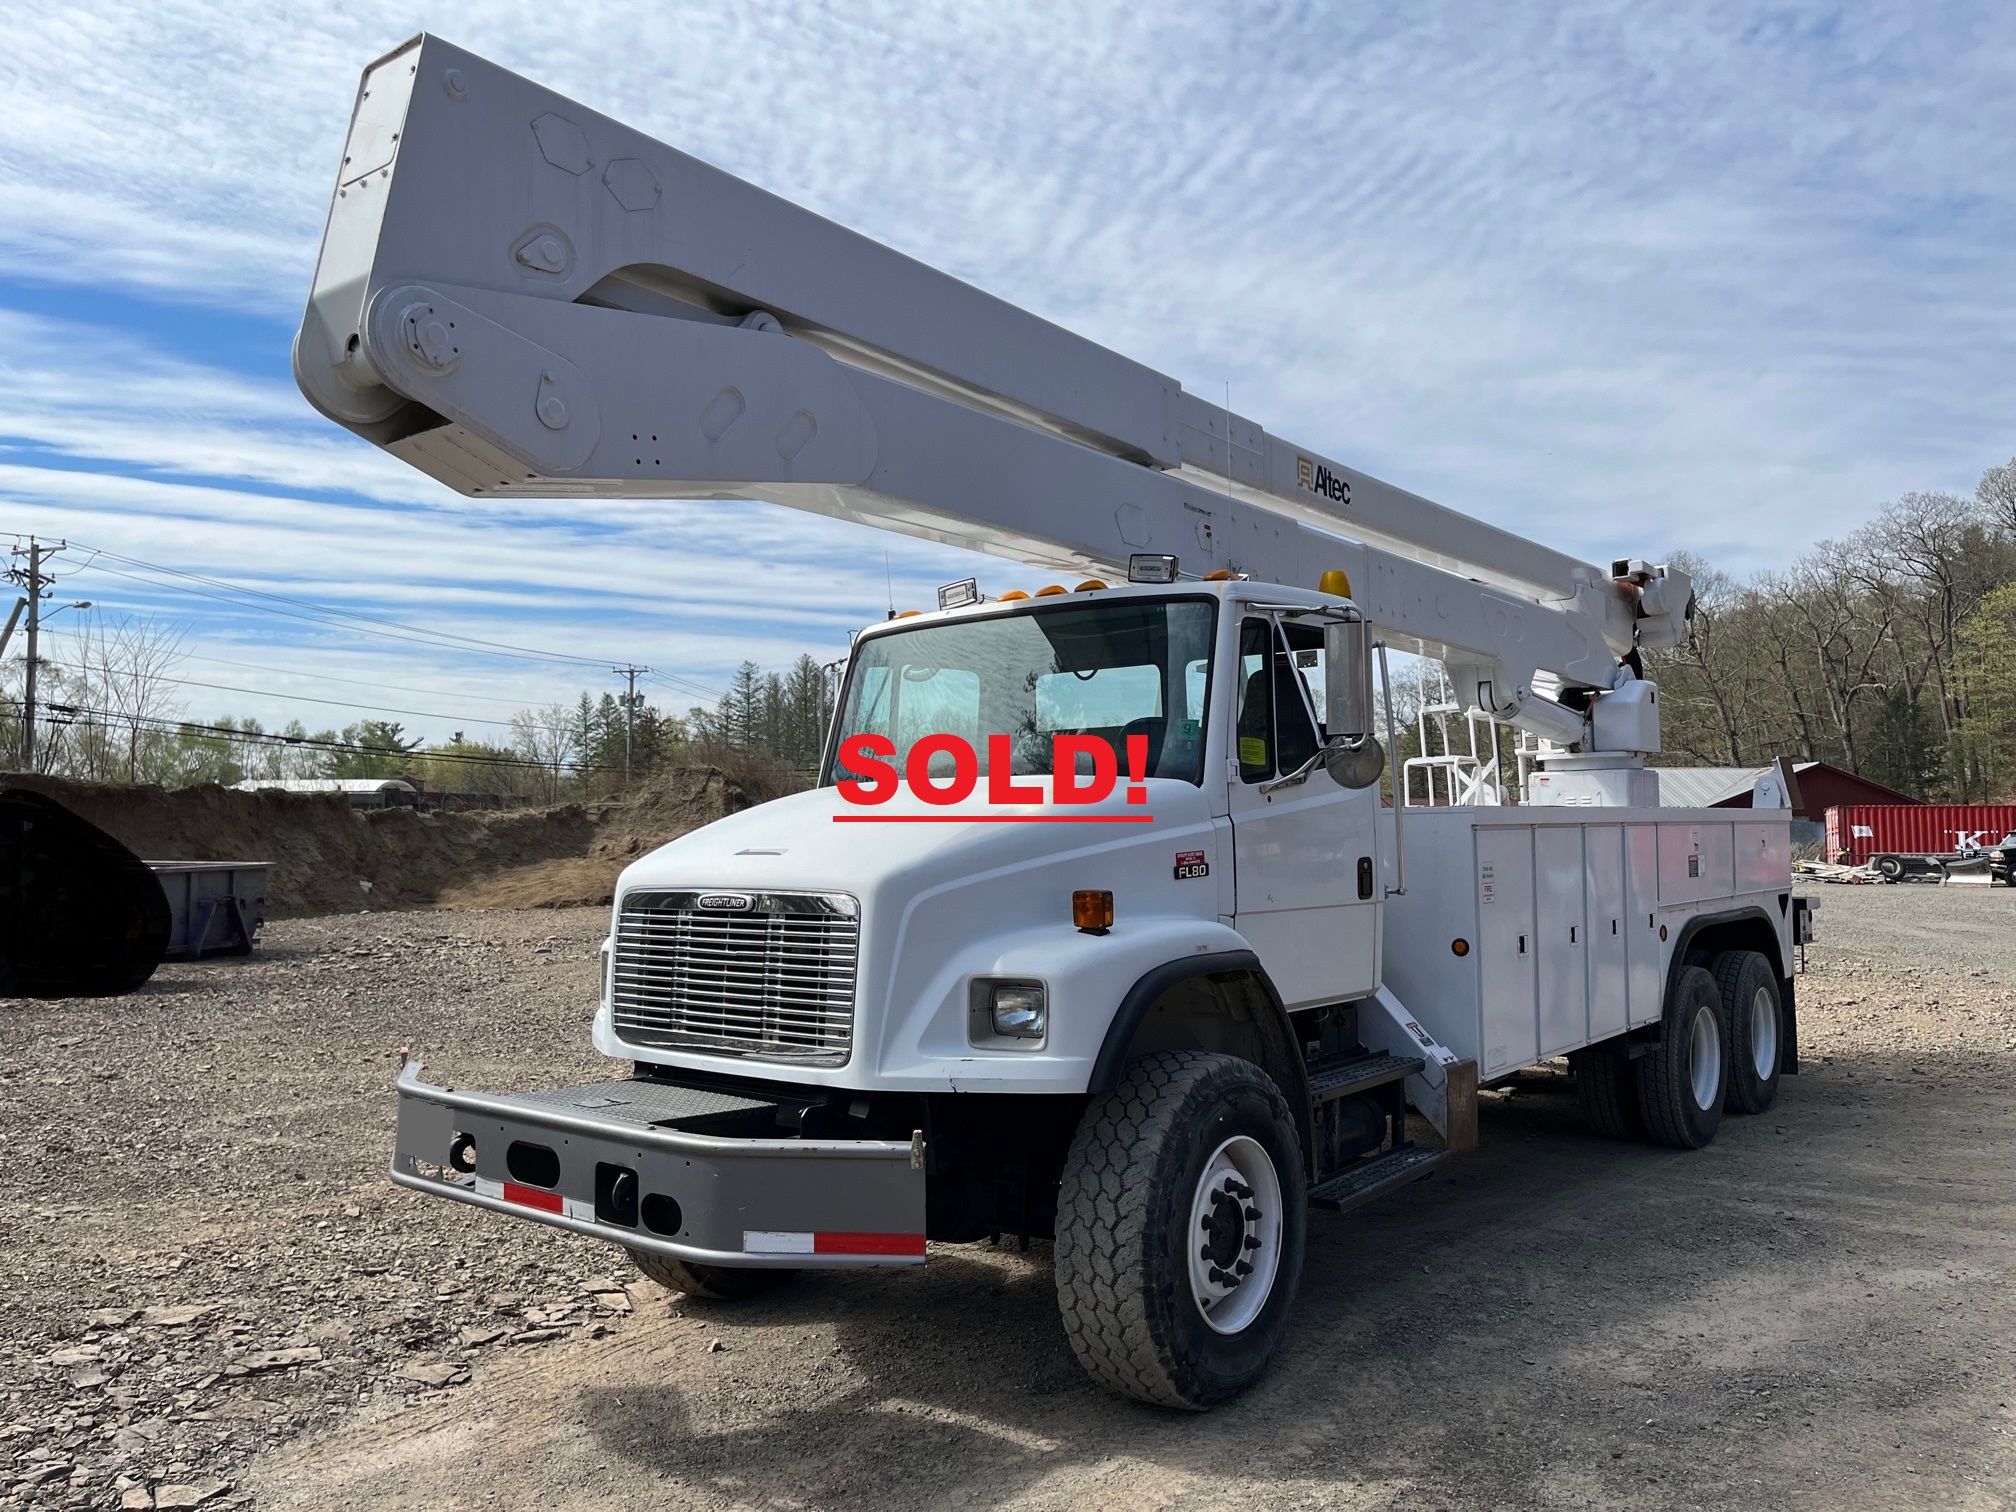 Freightliner FL80 Bucket Truck. The truck is a 2001 and is an 82' Altec aerial unit. The upper boom has a 7' telescopic extension. It's equipped with a two man bucket and material handler winch. There are upper and lower controls with 4 outriggers to stabilize the unit. The trucks chassi and body are super clean. All tires are in excellent condition with deep tire tread. The trucks powered by a Caterpillar 3126 diesel engine. The transmission is a Allison automatic. PTO hours are 7010. The truck is also equipped with selectable on demand four wheel drive (6x6) with differential locks. The mileage is low at only 16,555 miles and the unit has been fleet maintained. The boom has been certified by American Aerial in Amsterdam NY. The entire unit is needing nothing and completely turn key work ready.  Backed by all maintenance, repair and upgrade documents.